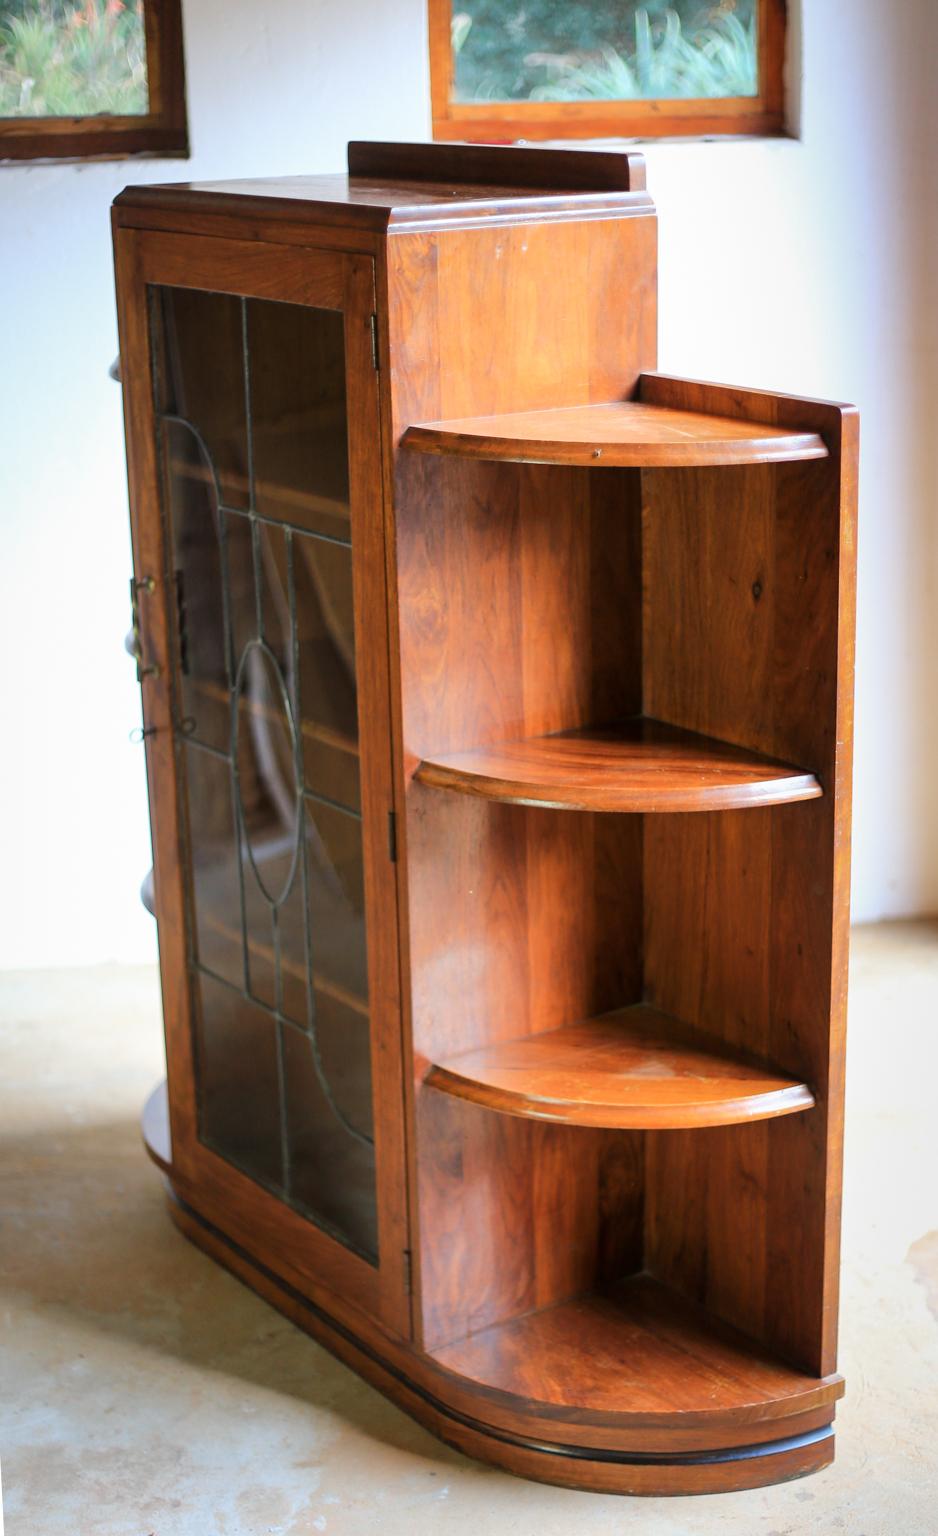 Mid-20th Century Solid Mahogany and Lead Glass Art Deco Book Case and Display Cabinet For Sale